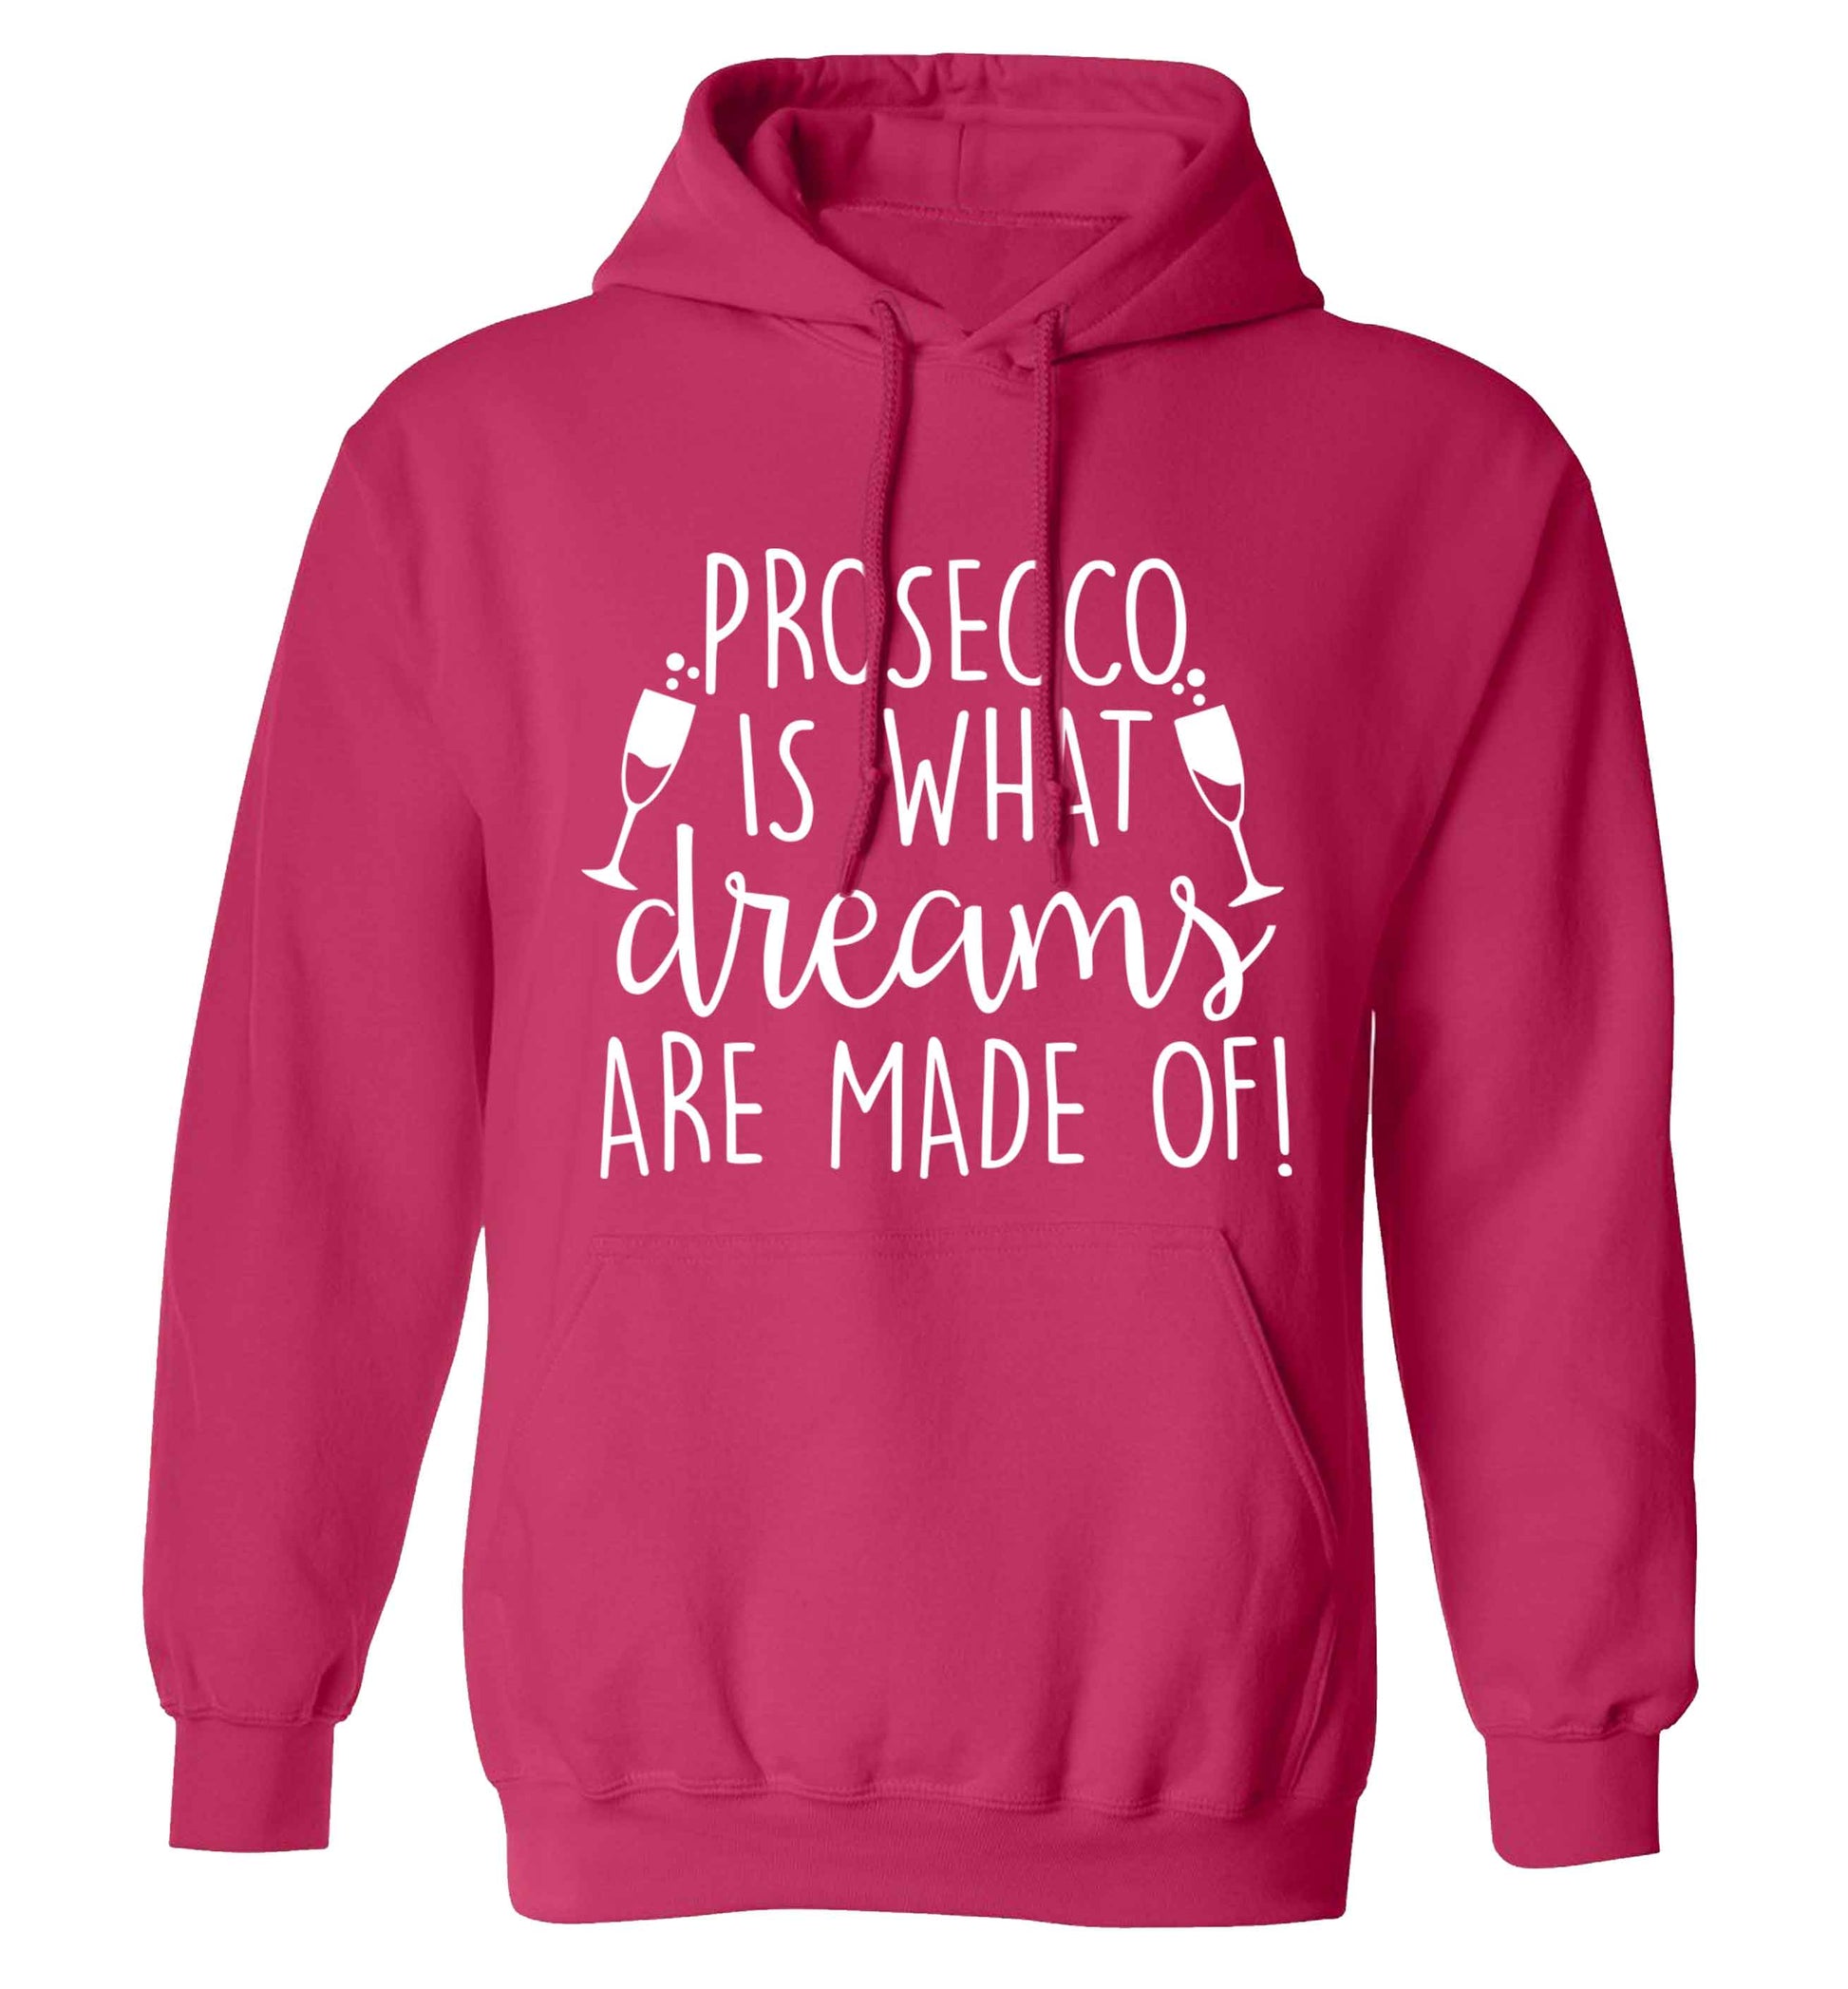 Prosecco is what dreams are made of adults unisex pink hoodie 2XL